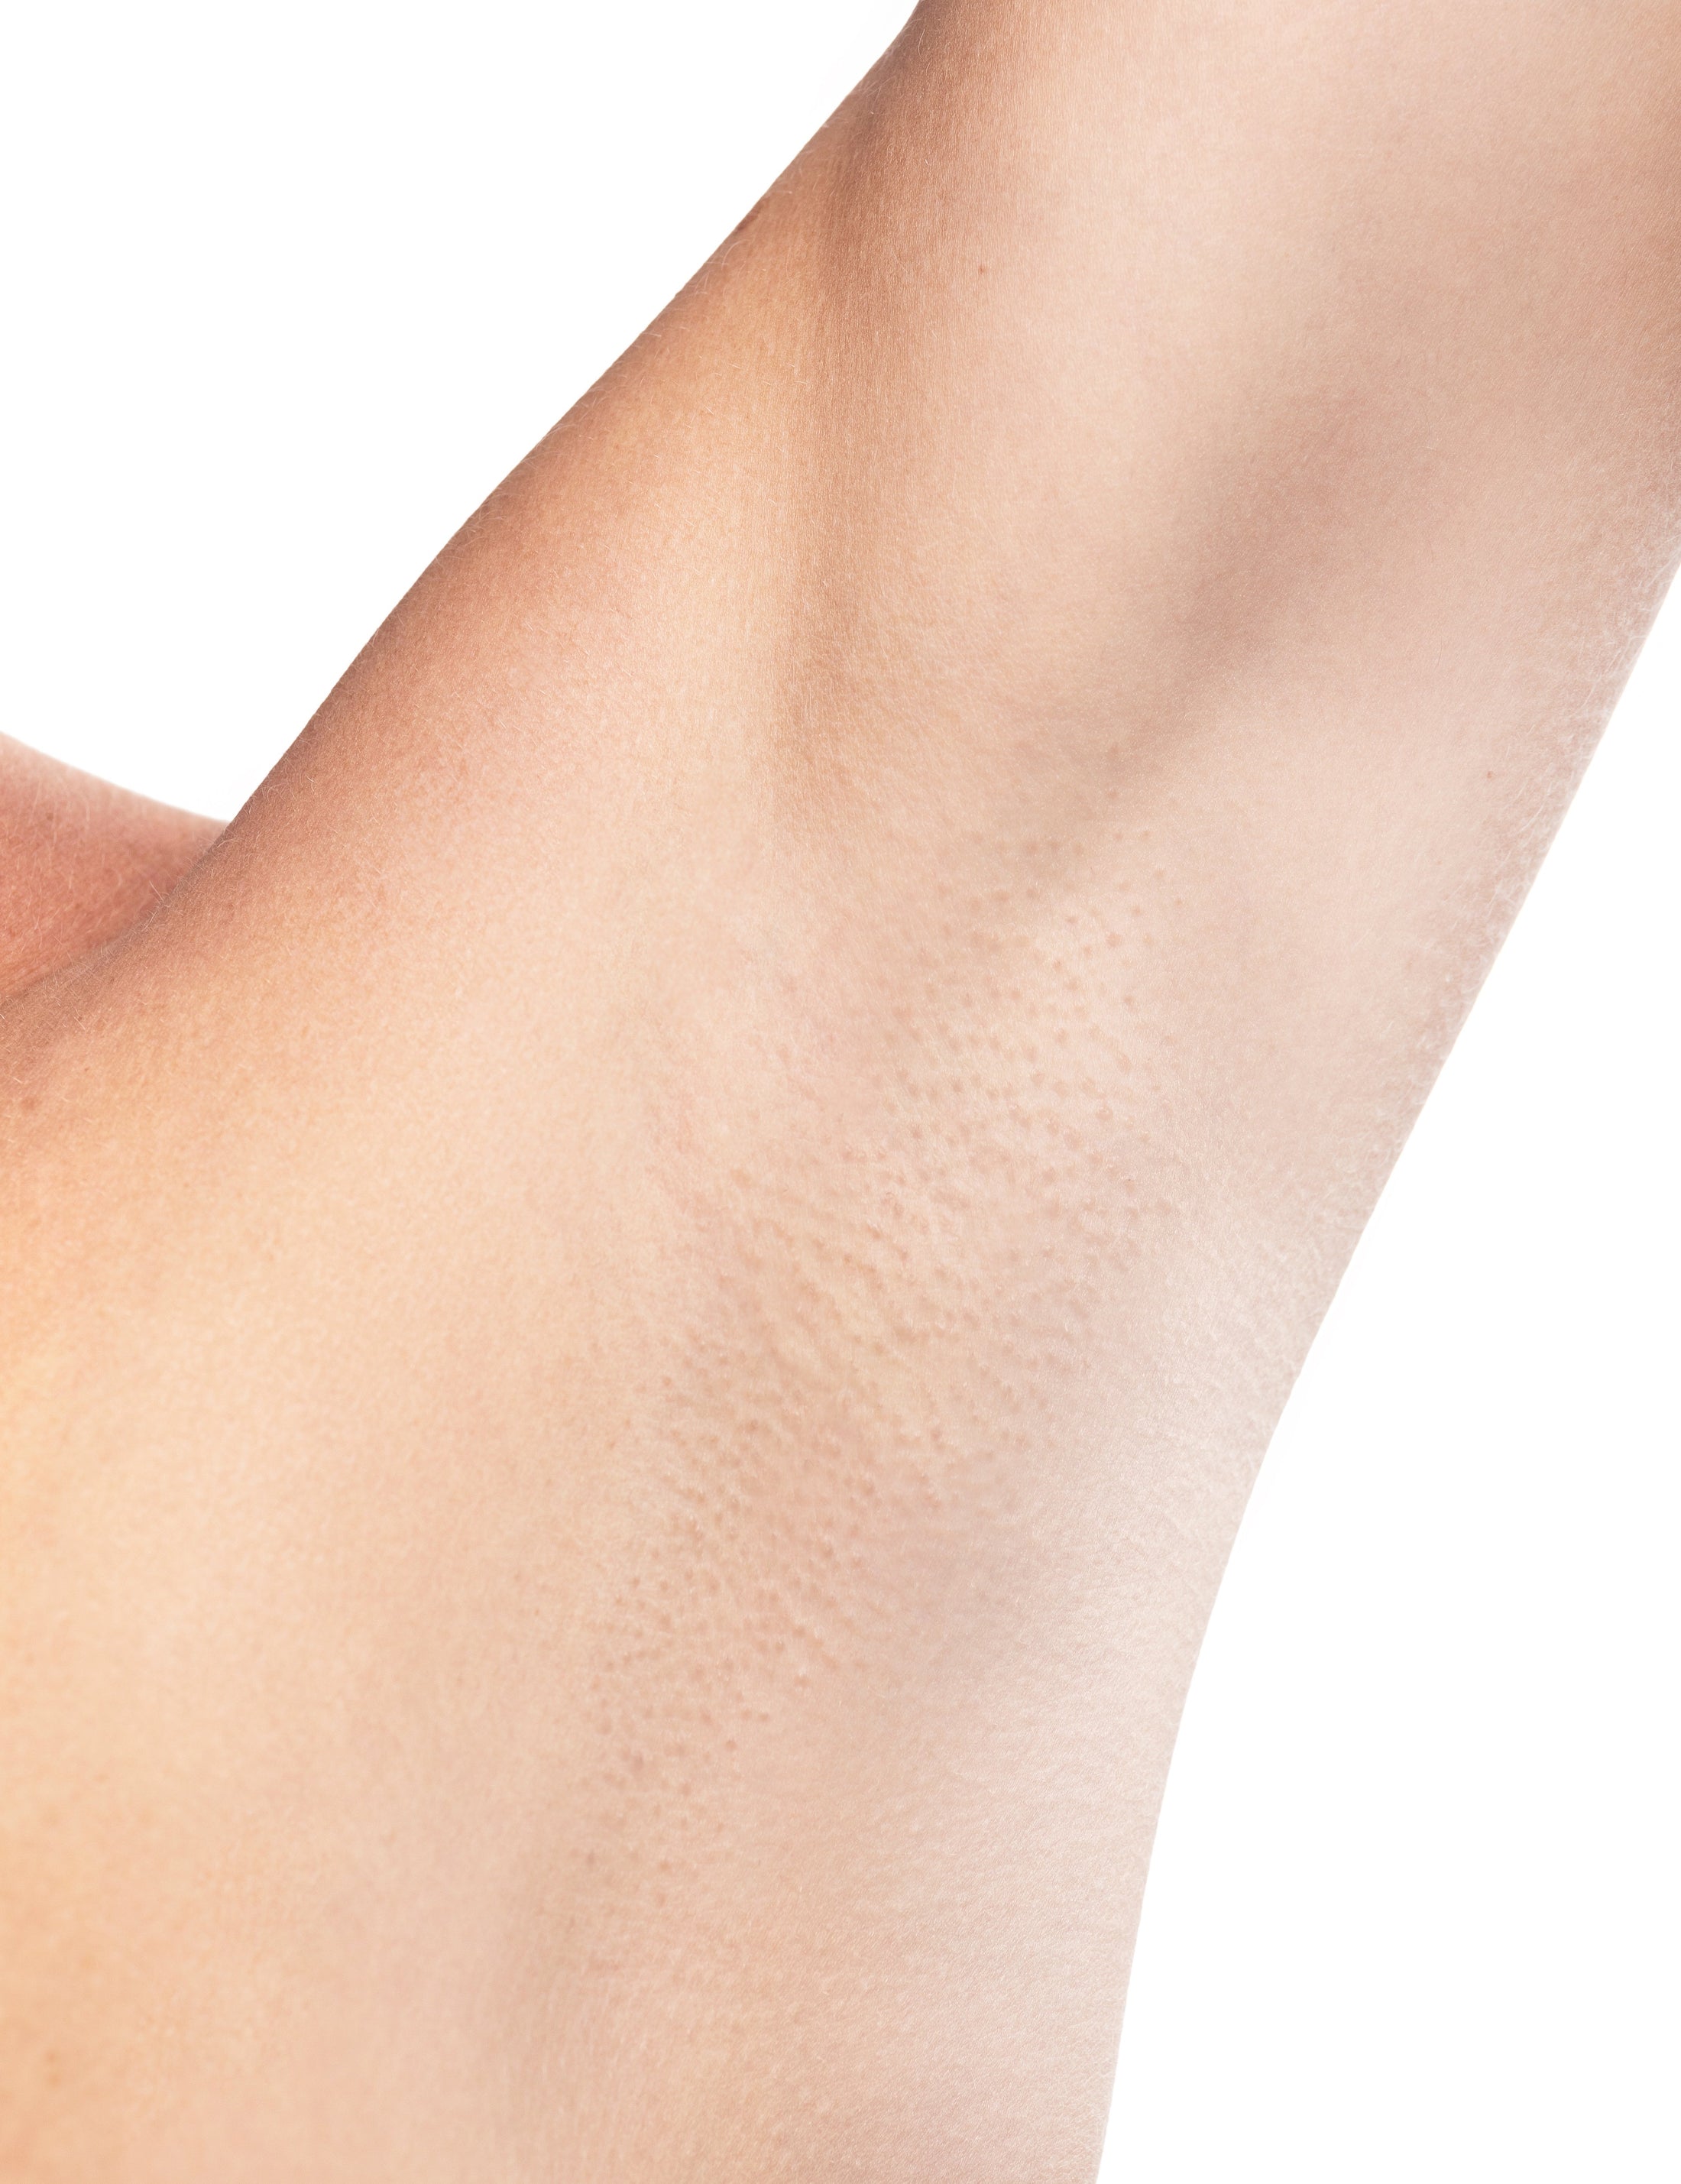 Laser Hair Removal for Women (Single Session)